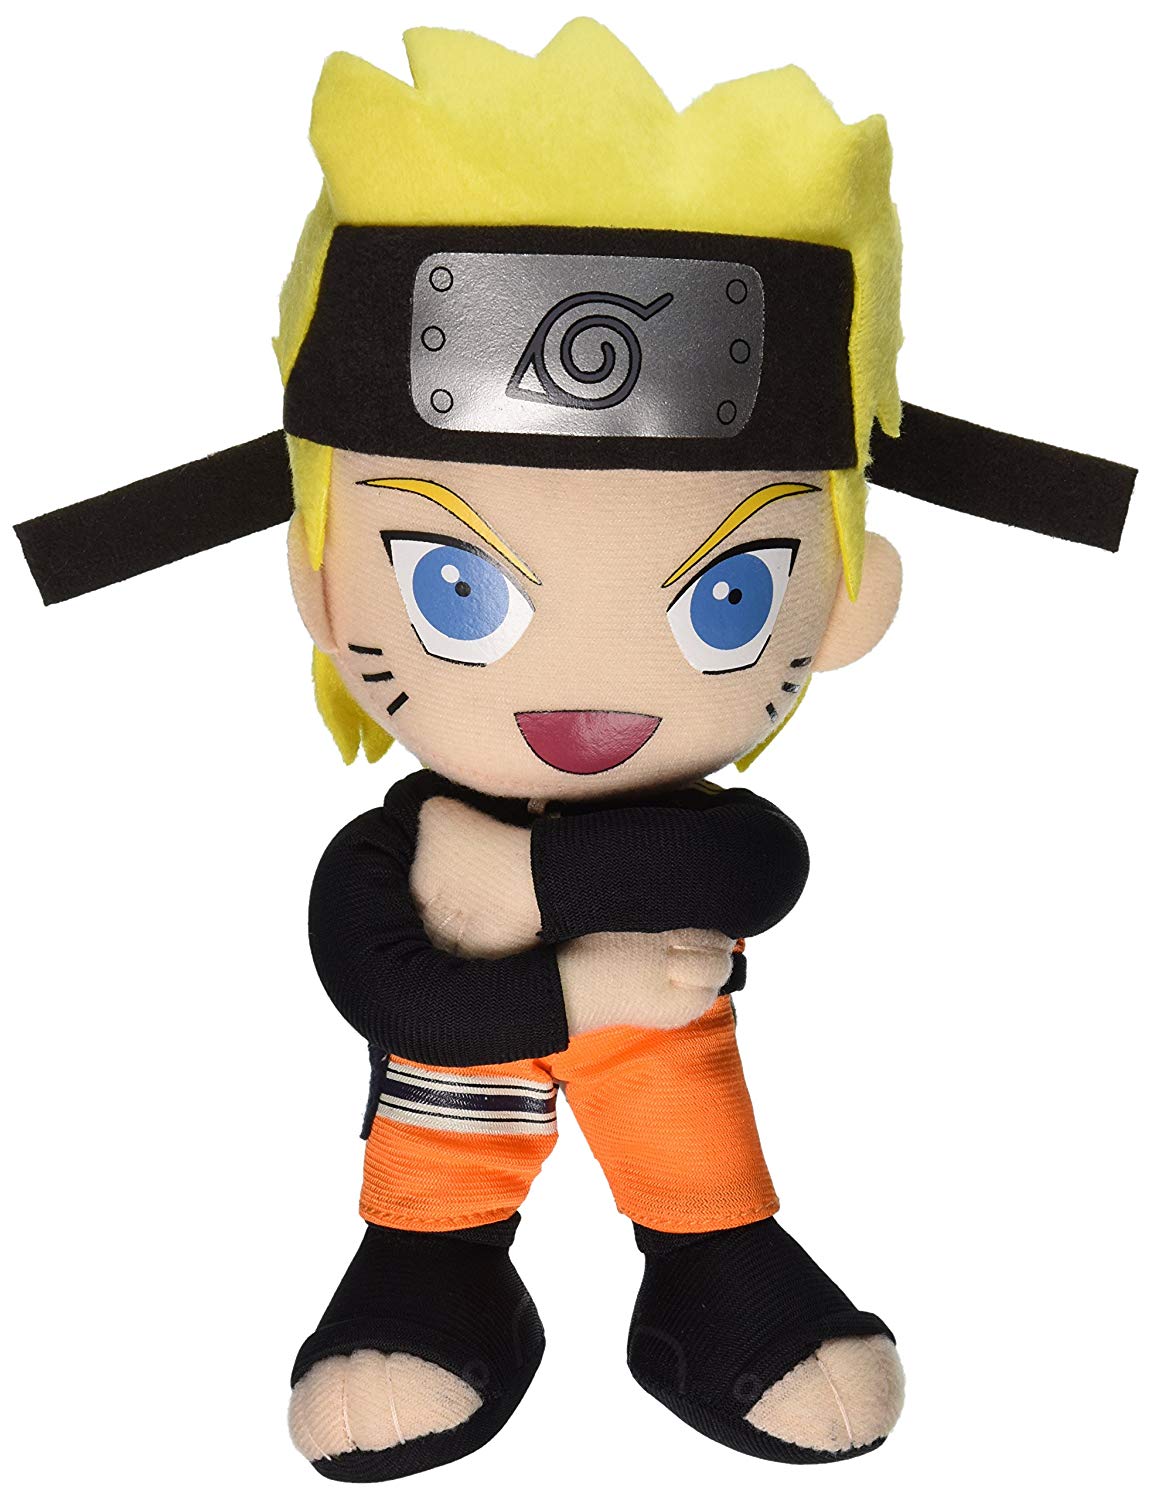 Great Eastern Official Naruto Shippuden: Naruto 9" Plush Doll - Super Anime Store FREE SHIPPING FAST SHIPPING USA